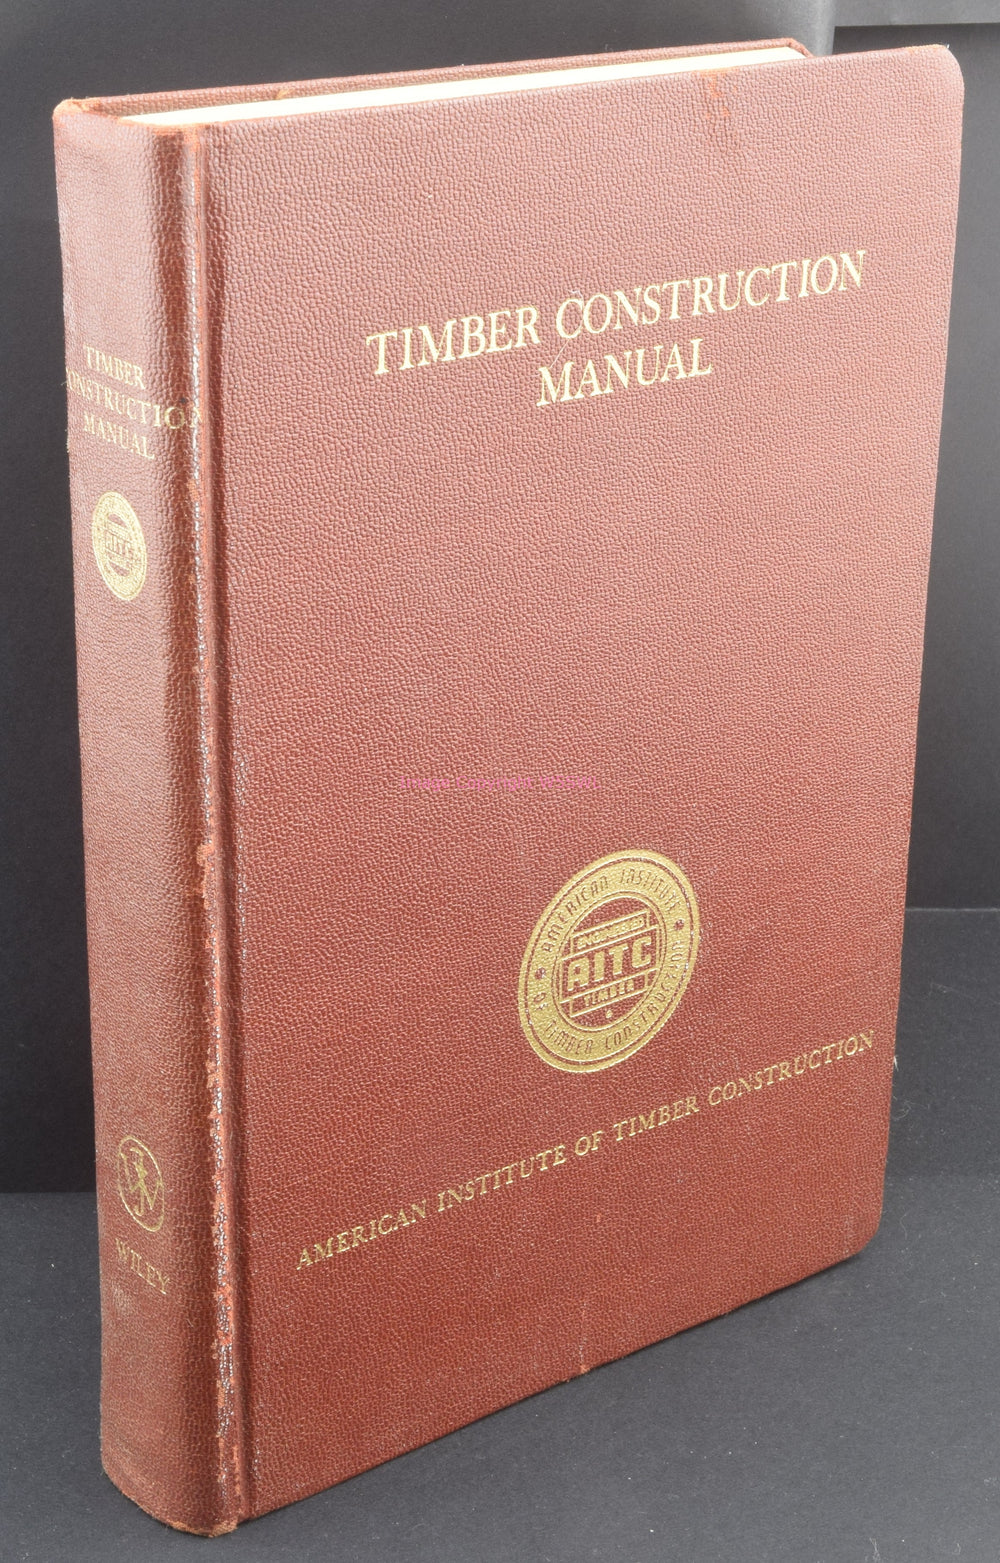 Timber Construction Manual 1966 American Institute Of Timber Construction - Dave's Hobby Shop by W5SWL